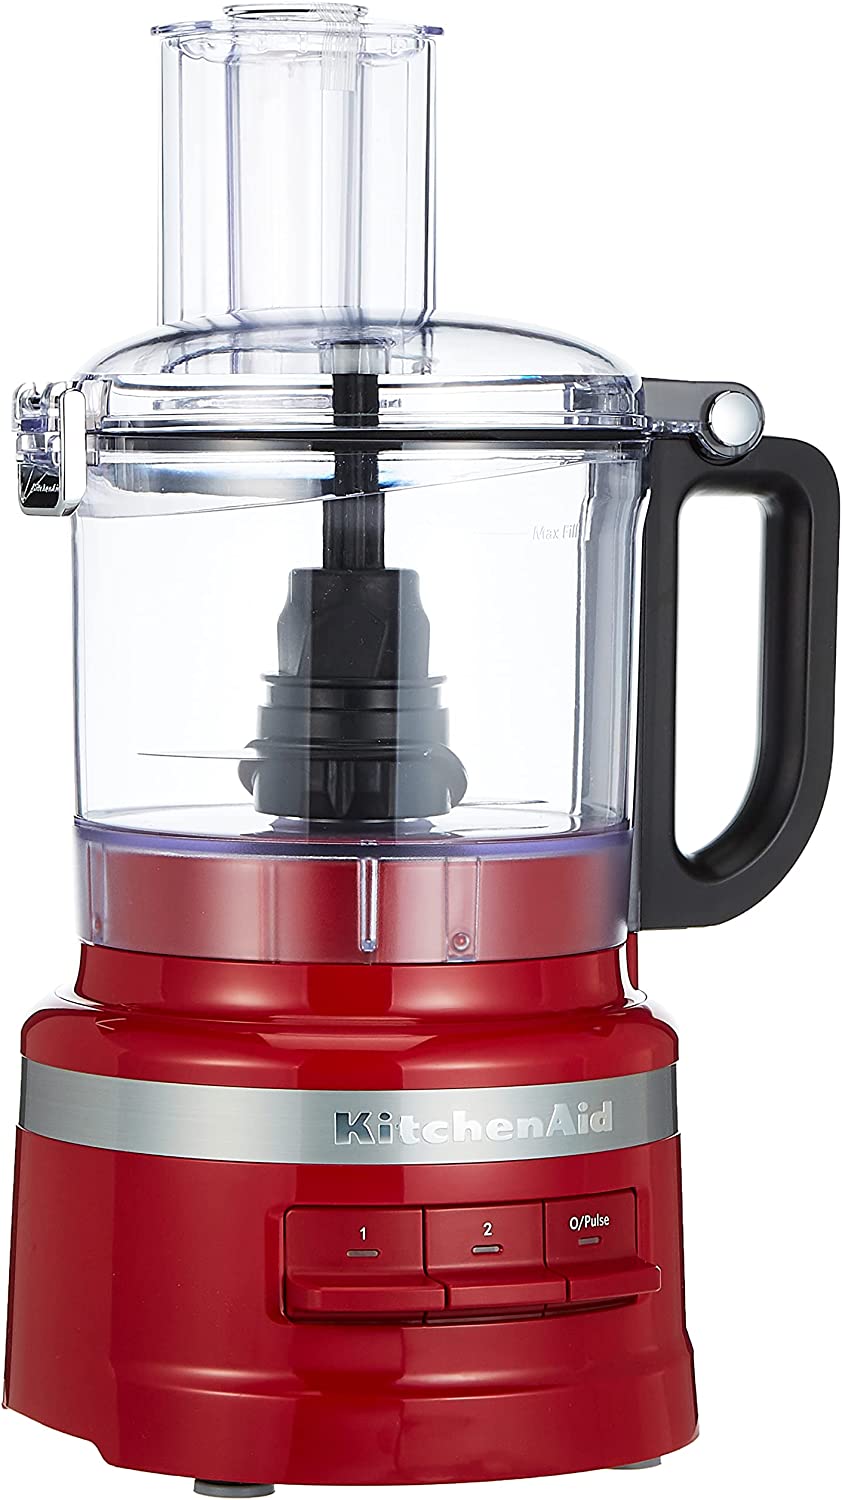 KITCHENAID KFP0718ER 7-CUP 1.7 LITER FOOD PROCESSOR - EMPIRE RED *PLEASE  READ*